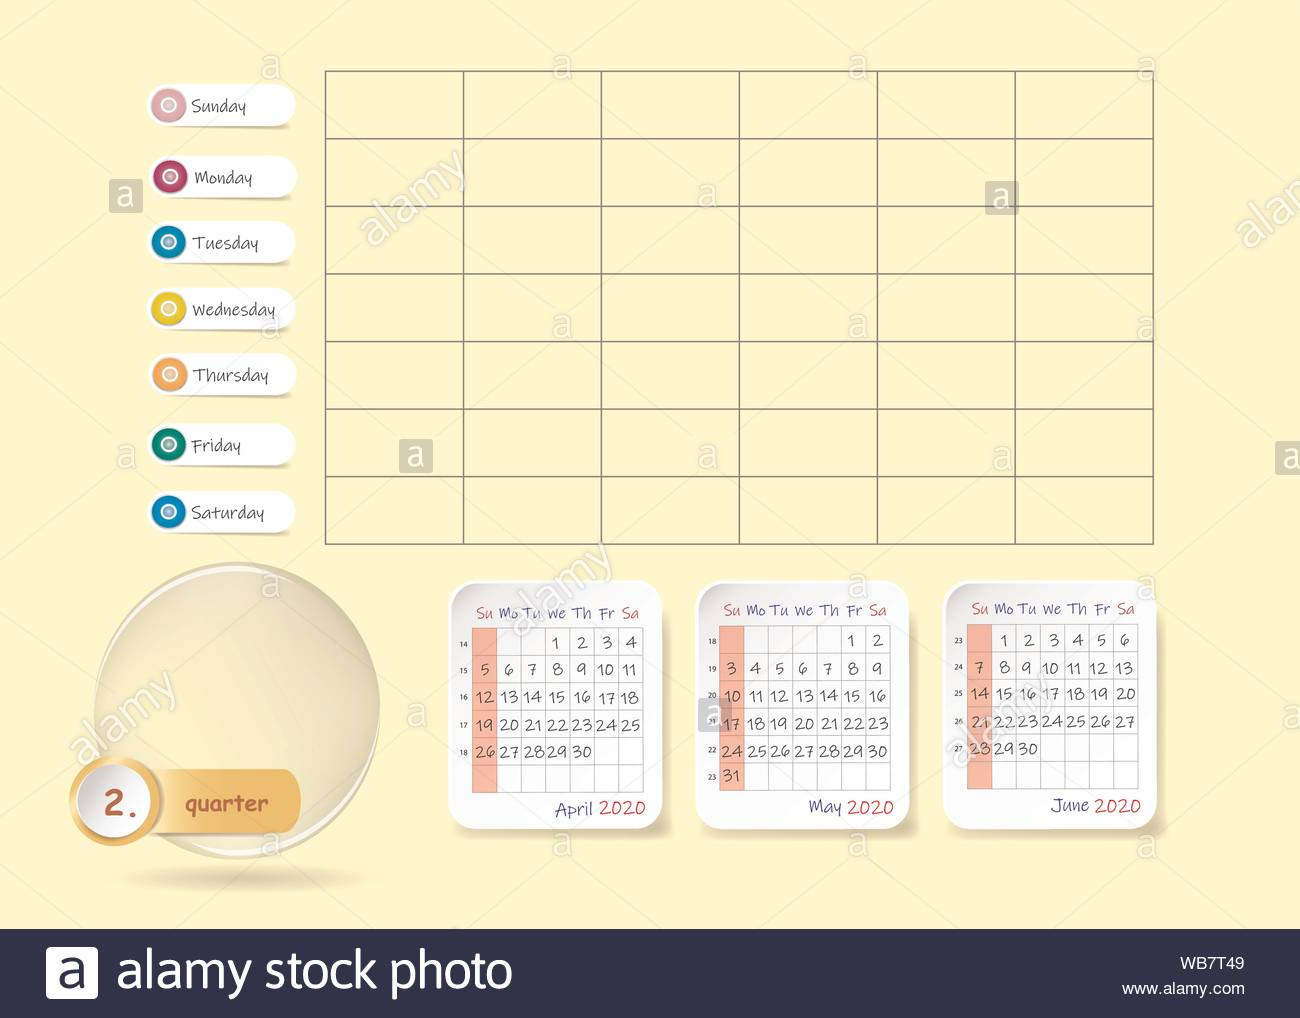 Calendar For Second Quarter Of 2020 Year With Weekly Planner